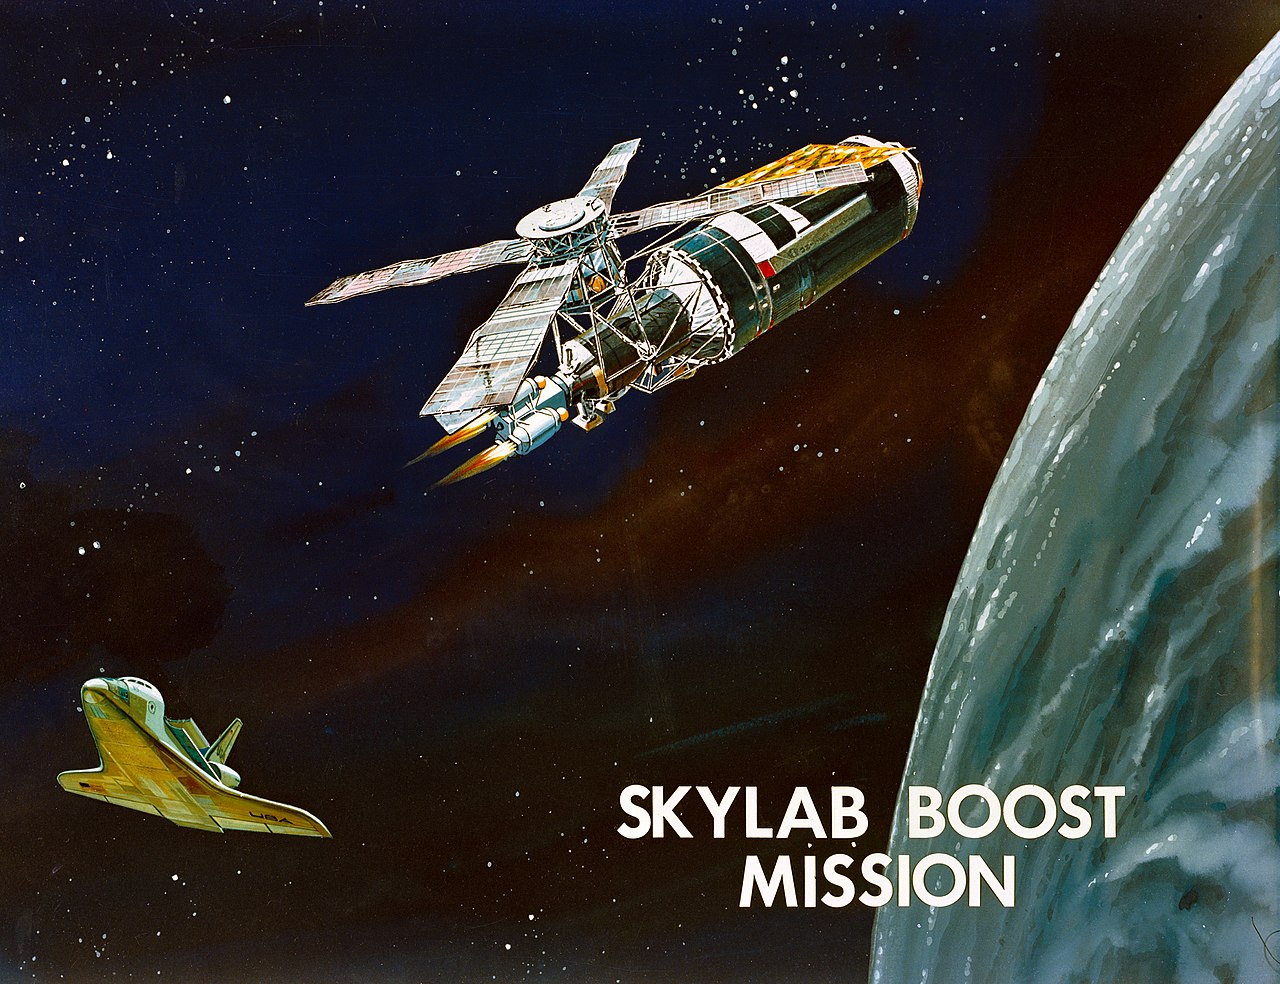 Illustration of a proposed Skylab boost mission by the space shuttle